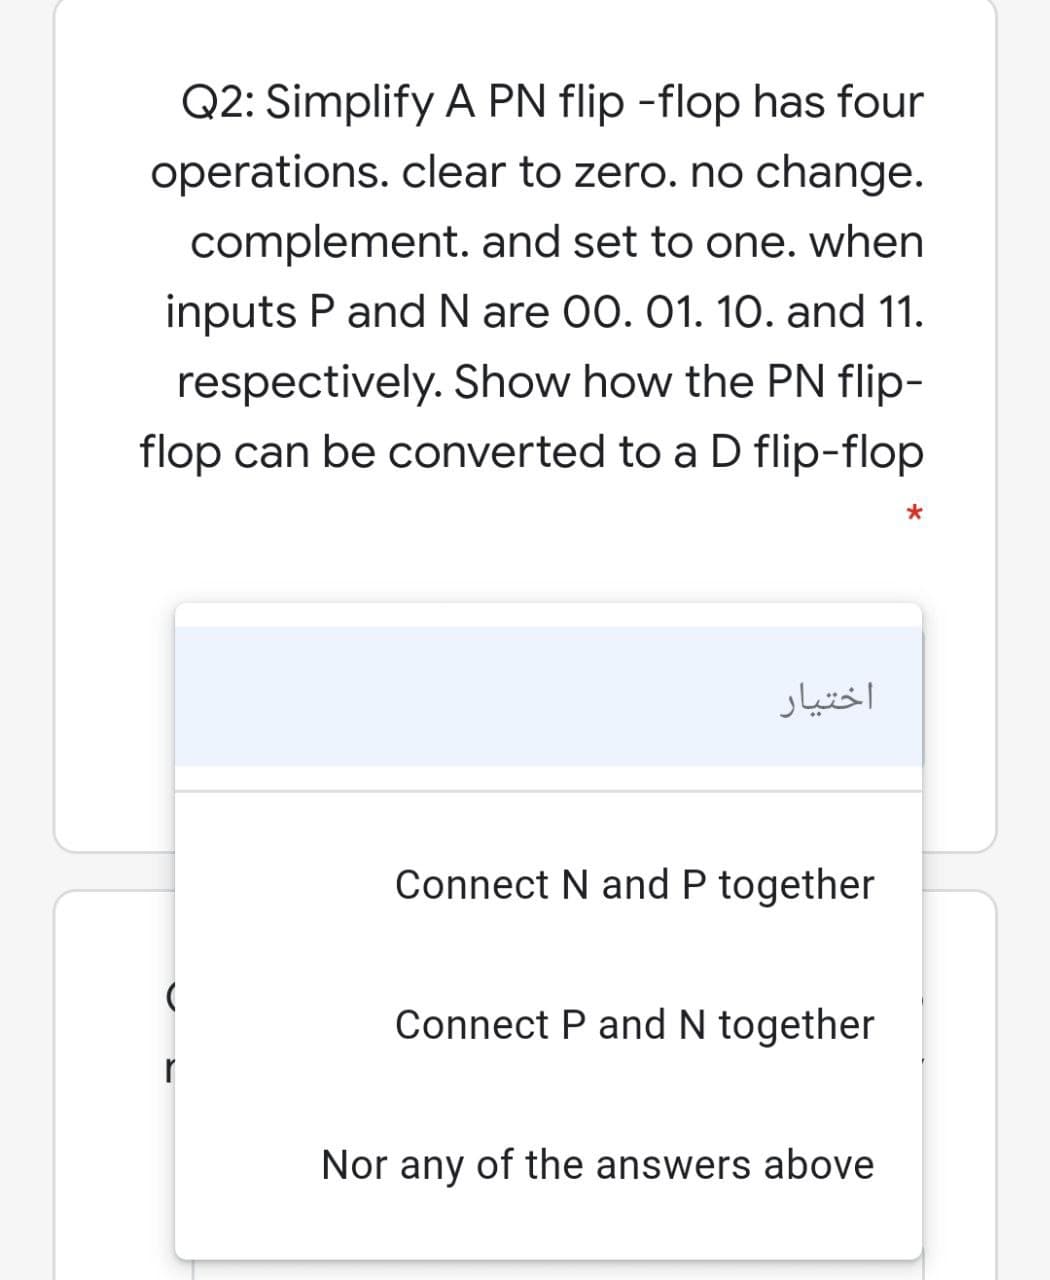 Q2: Simplify A PN flip -flop has four
operations. clear to zero. no change.
complement. and set to one. when
inputs P and N are 00. 01. 10. and 11.
respectively. Show how the PN flip-
flop can be converted to a D flip-flop
اختیار
Connect N and P together
Connect P and N together
Nor any of the answers above
